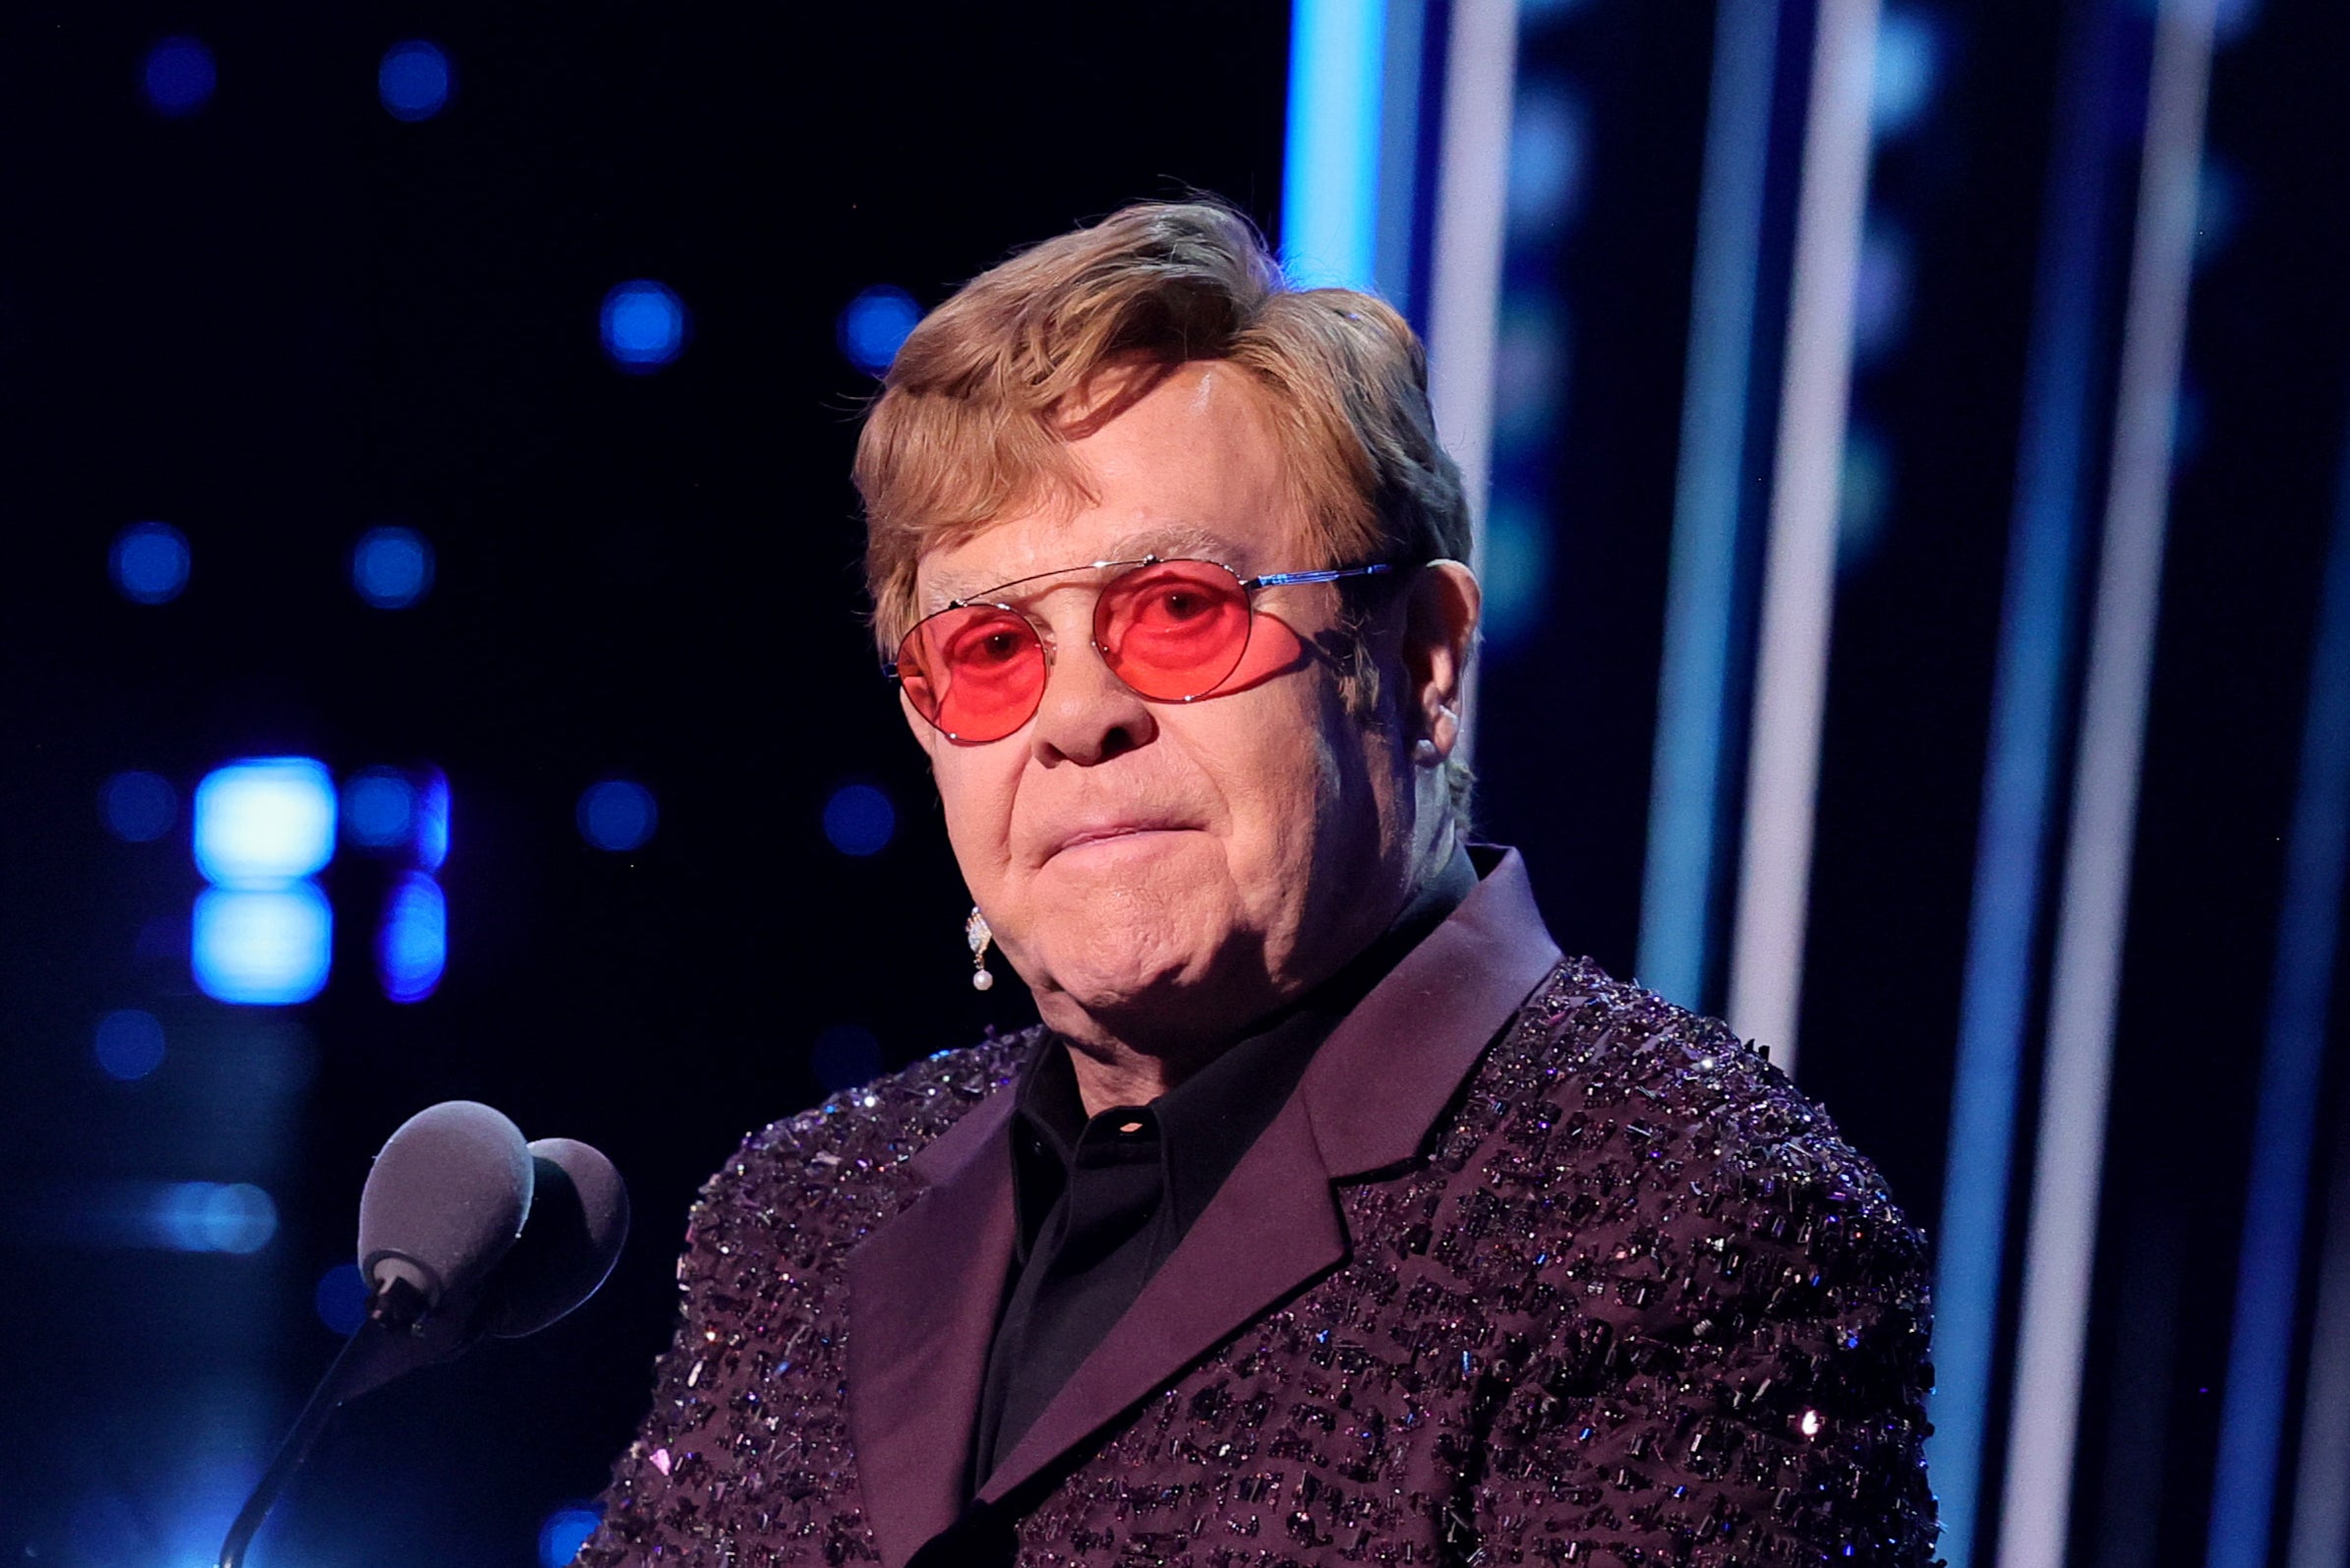 Sir Elton John gave away 5.7 per cent of his £470 million fortune this year